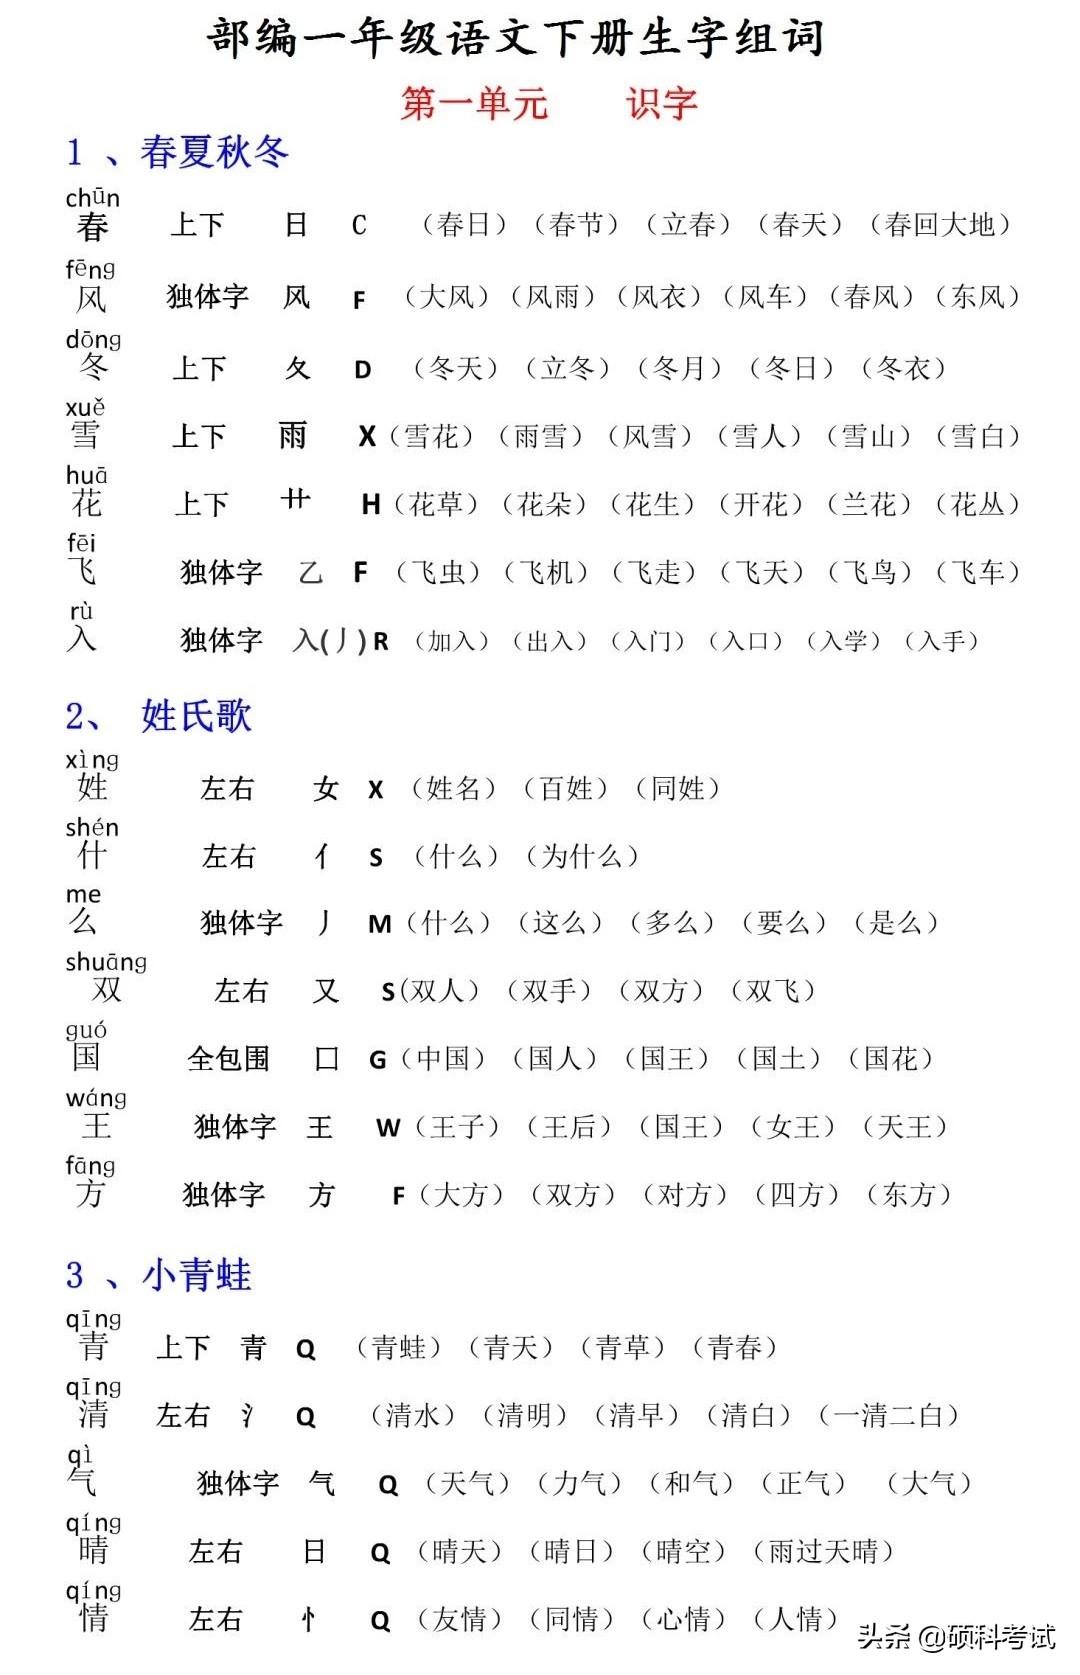 First Grade Chinese Volume 2 "New Characters and Words" with pinyin, radicals, font structure summary, keep it in your collection